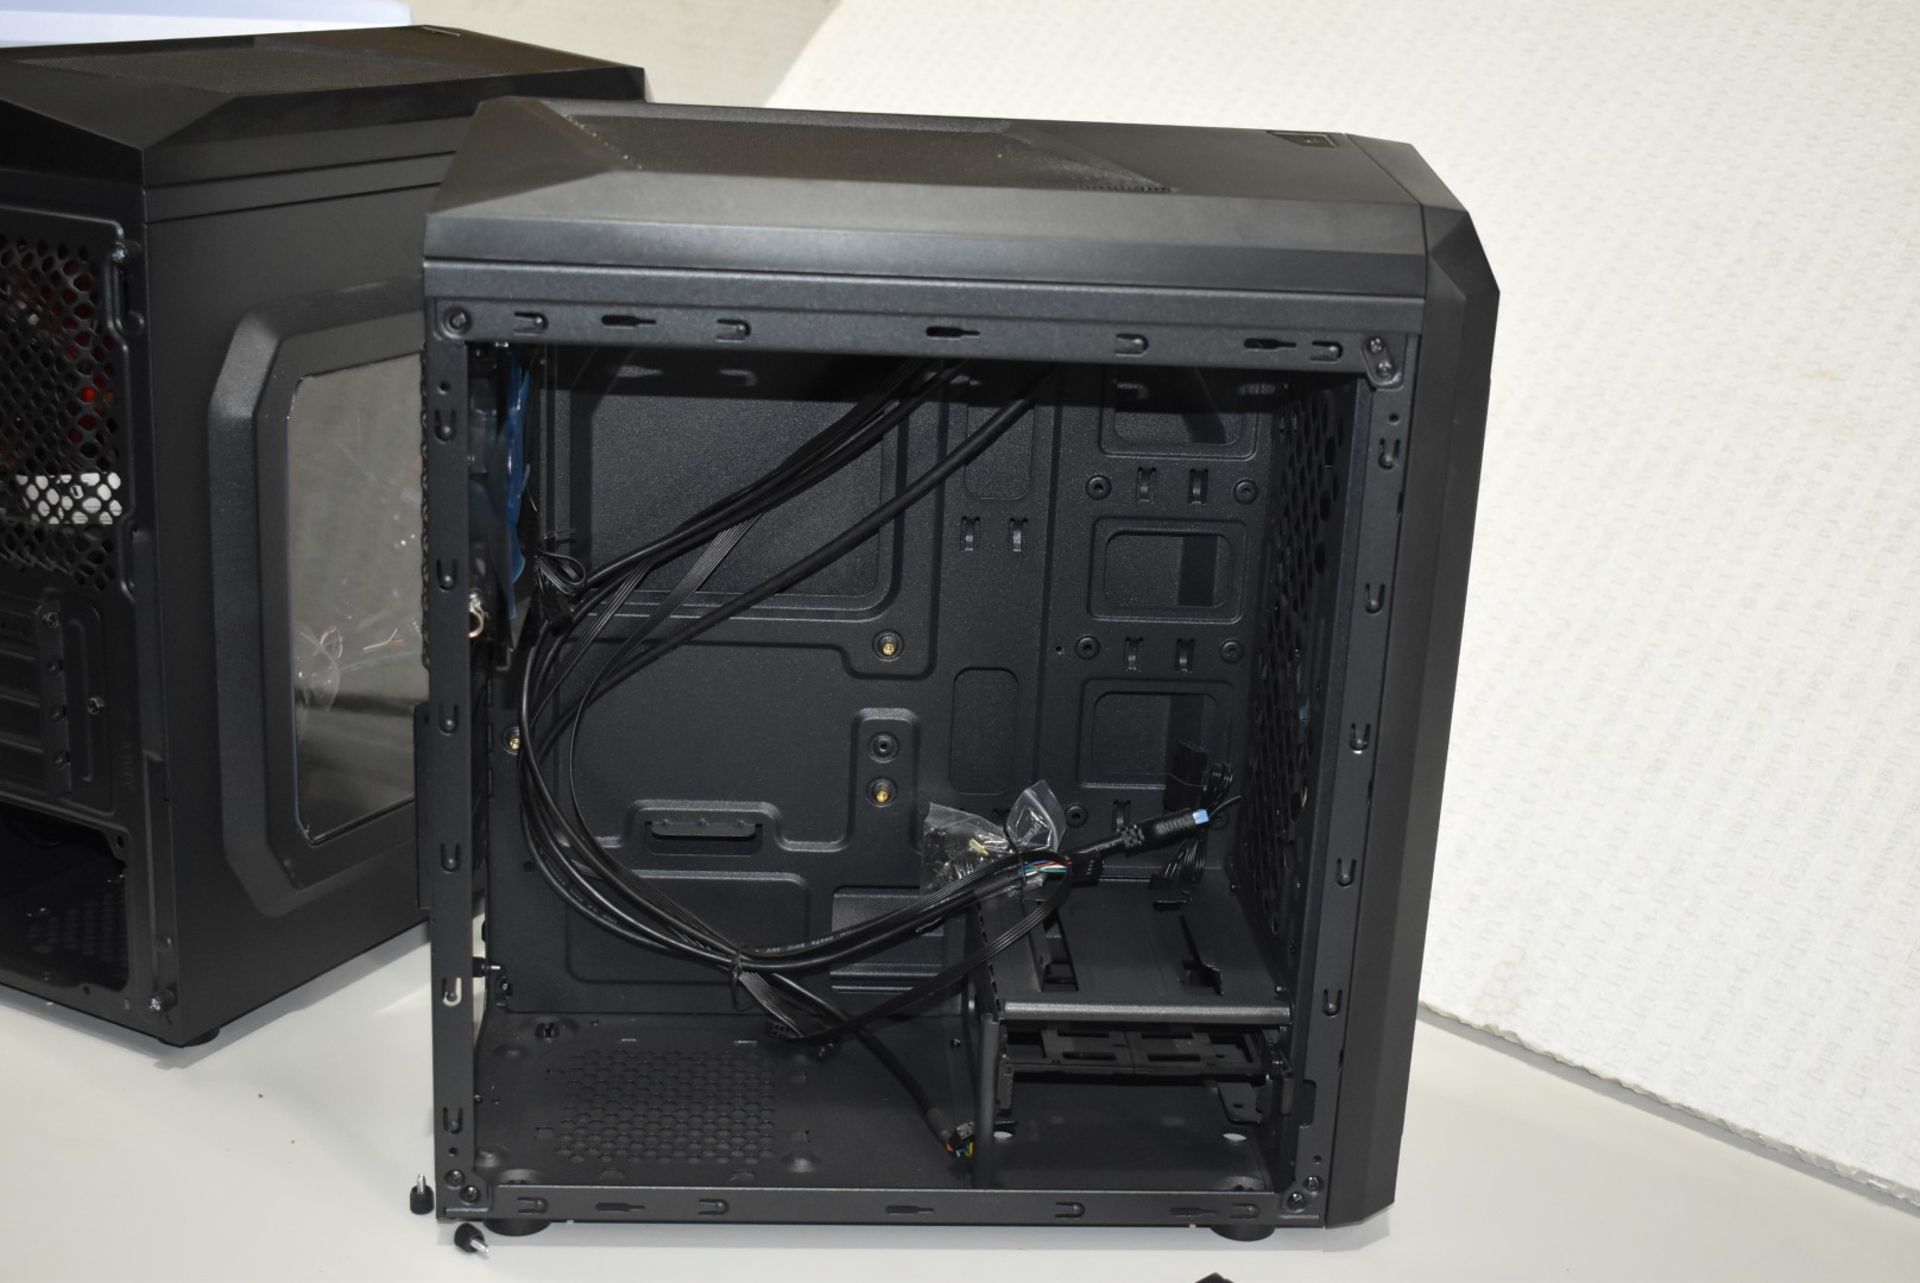 5 x ATX Computer Cases With USB 3.0, SD Card Readers, Side Window and Case Fan - Image 8 of 8